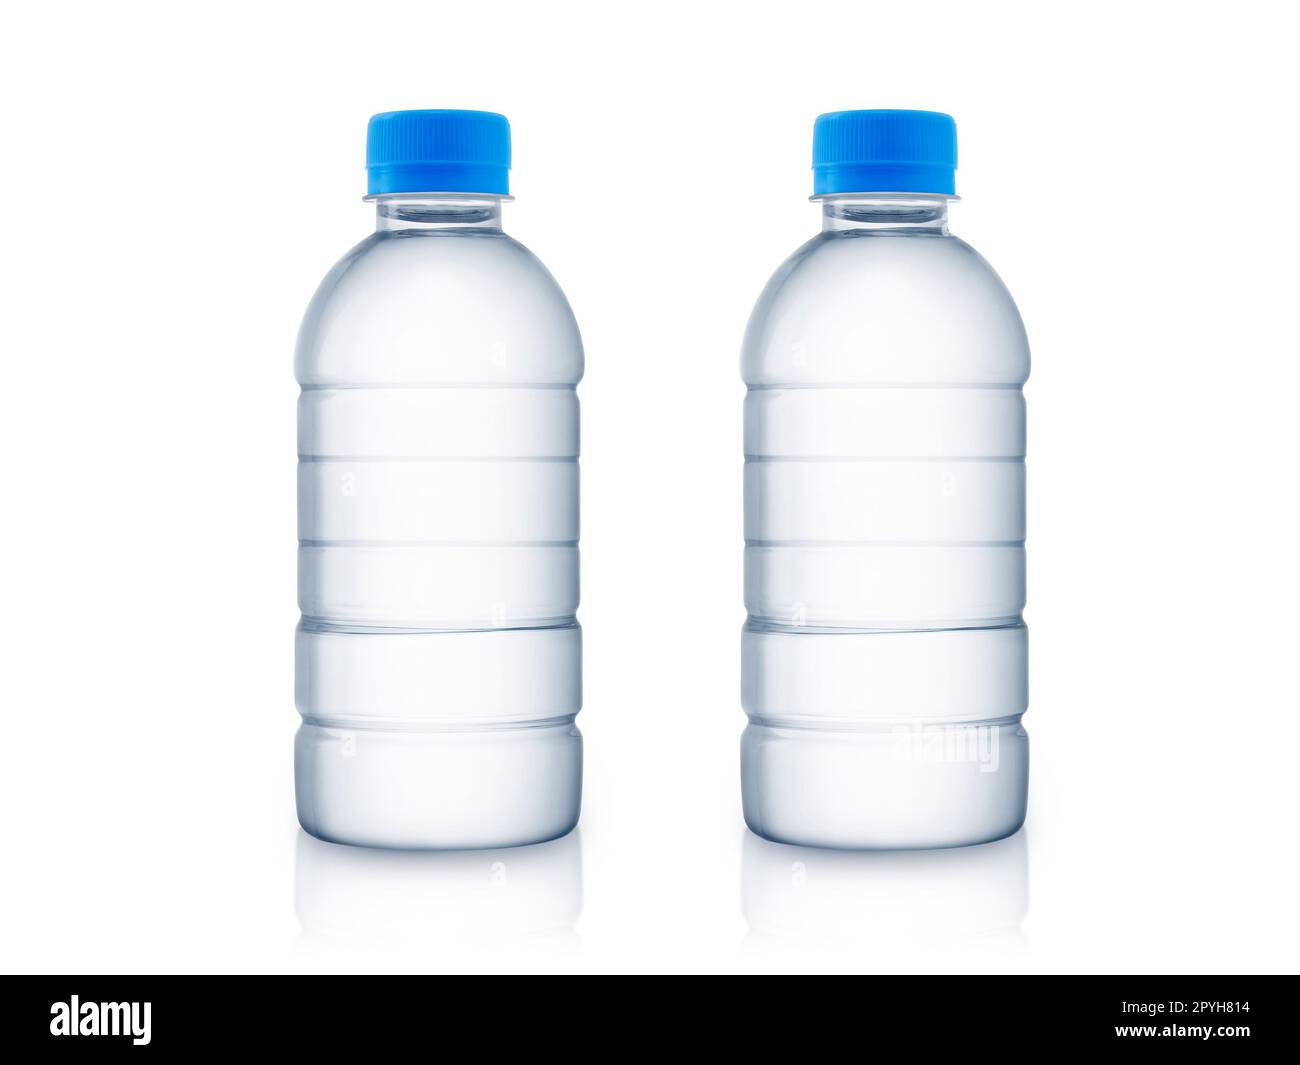 https://c8.alamy.com/comp/2PYH814/empty-clean-and-clear-water-bottle-isolated-on-with-isolated-on-a-white-background-2PYH814.jpg